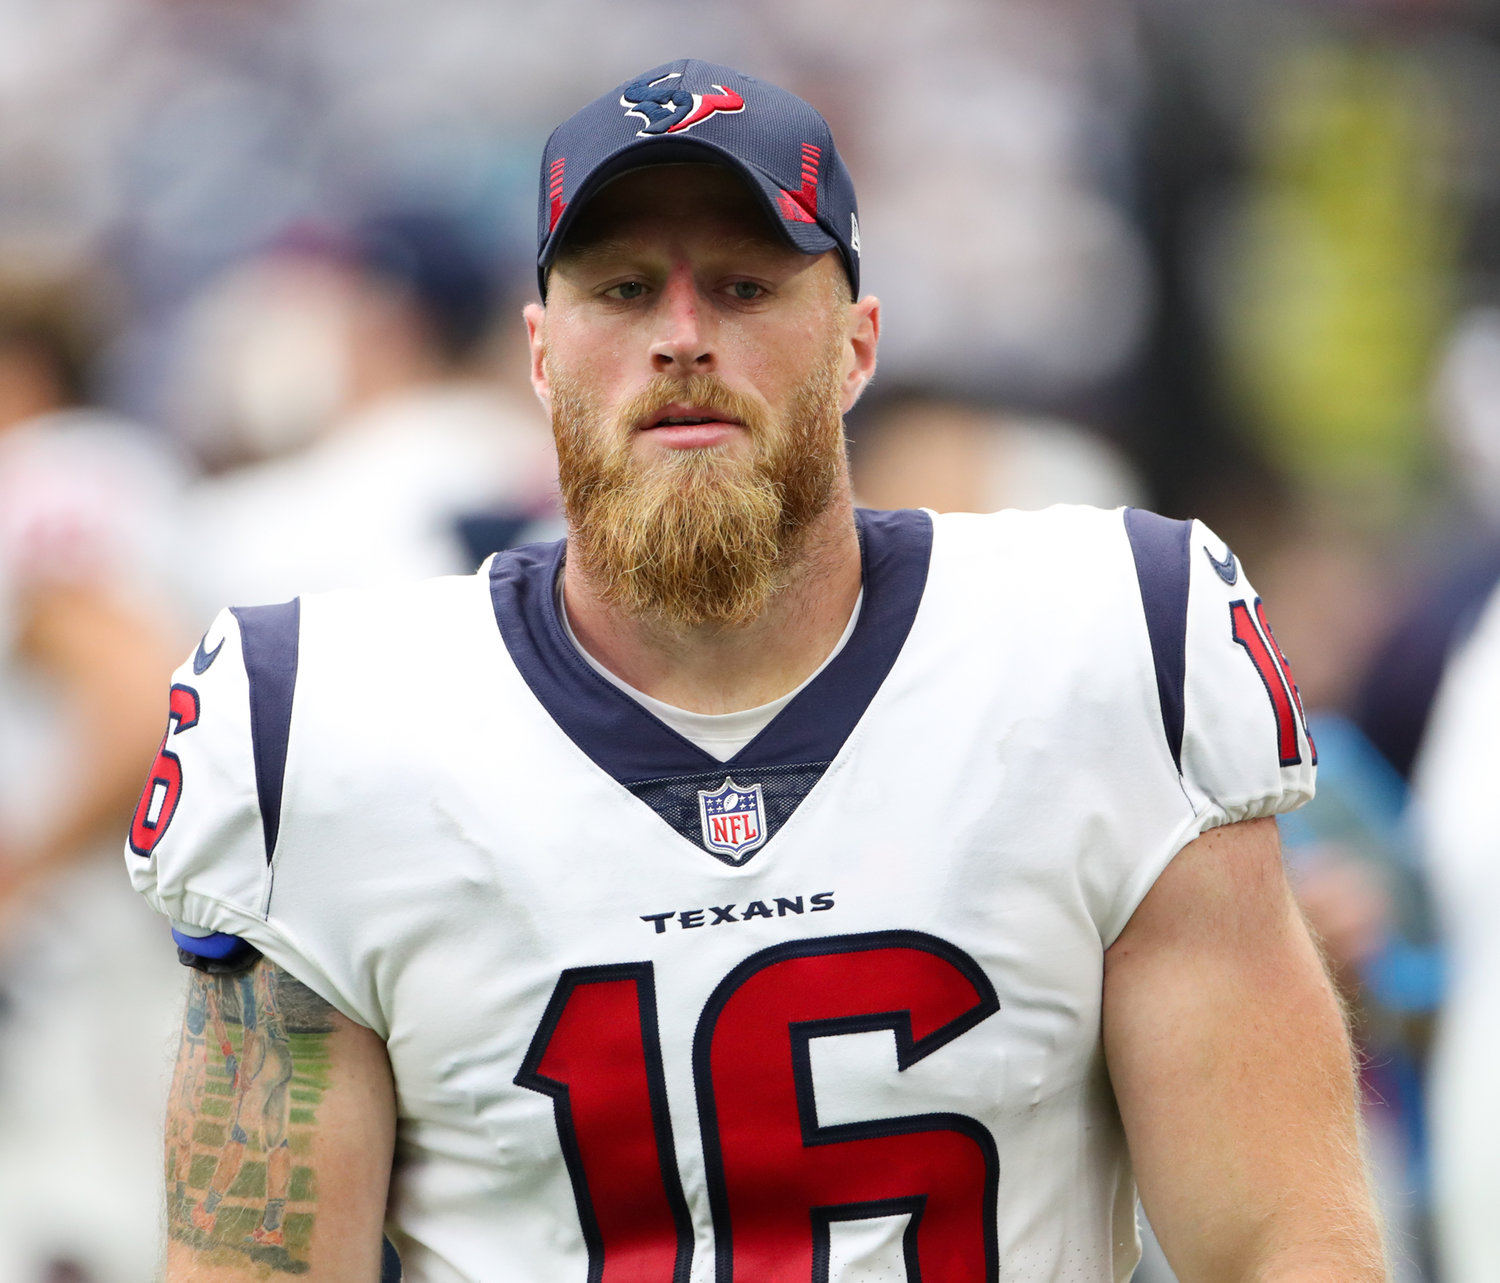 Houston Texans kicker Joey Slye during the second half of an NFL game between the Houston Texans and the Jacksonville Jaguars on September 12, 2021 in Houston, Texas.